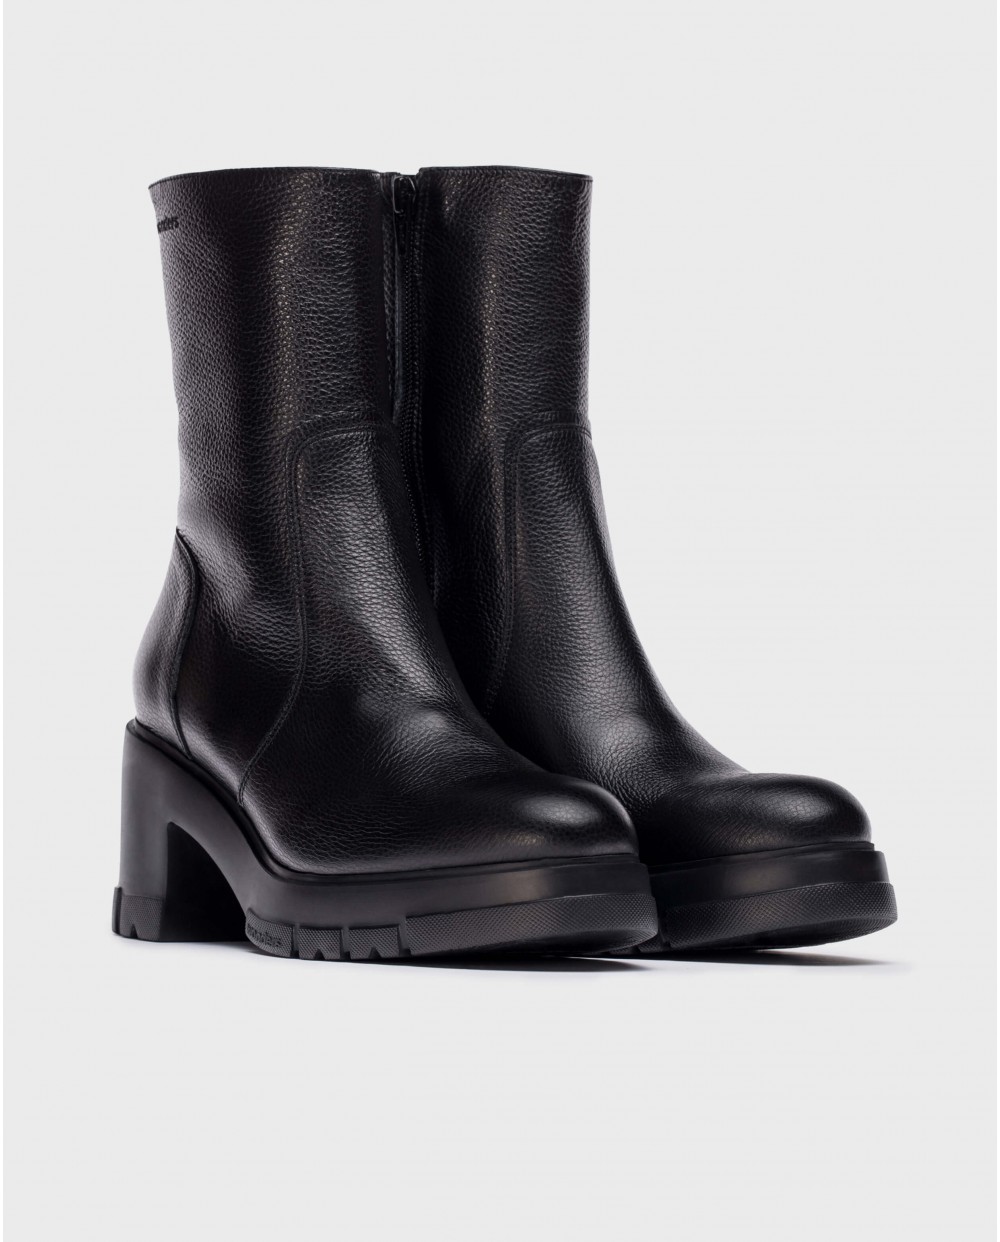 Black combat leather ankle boot